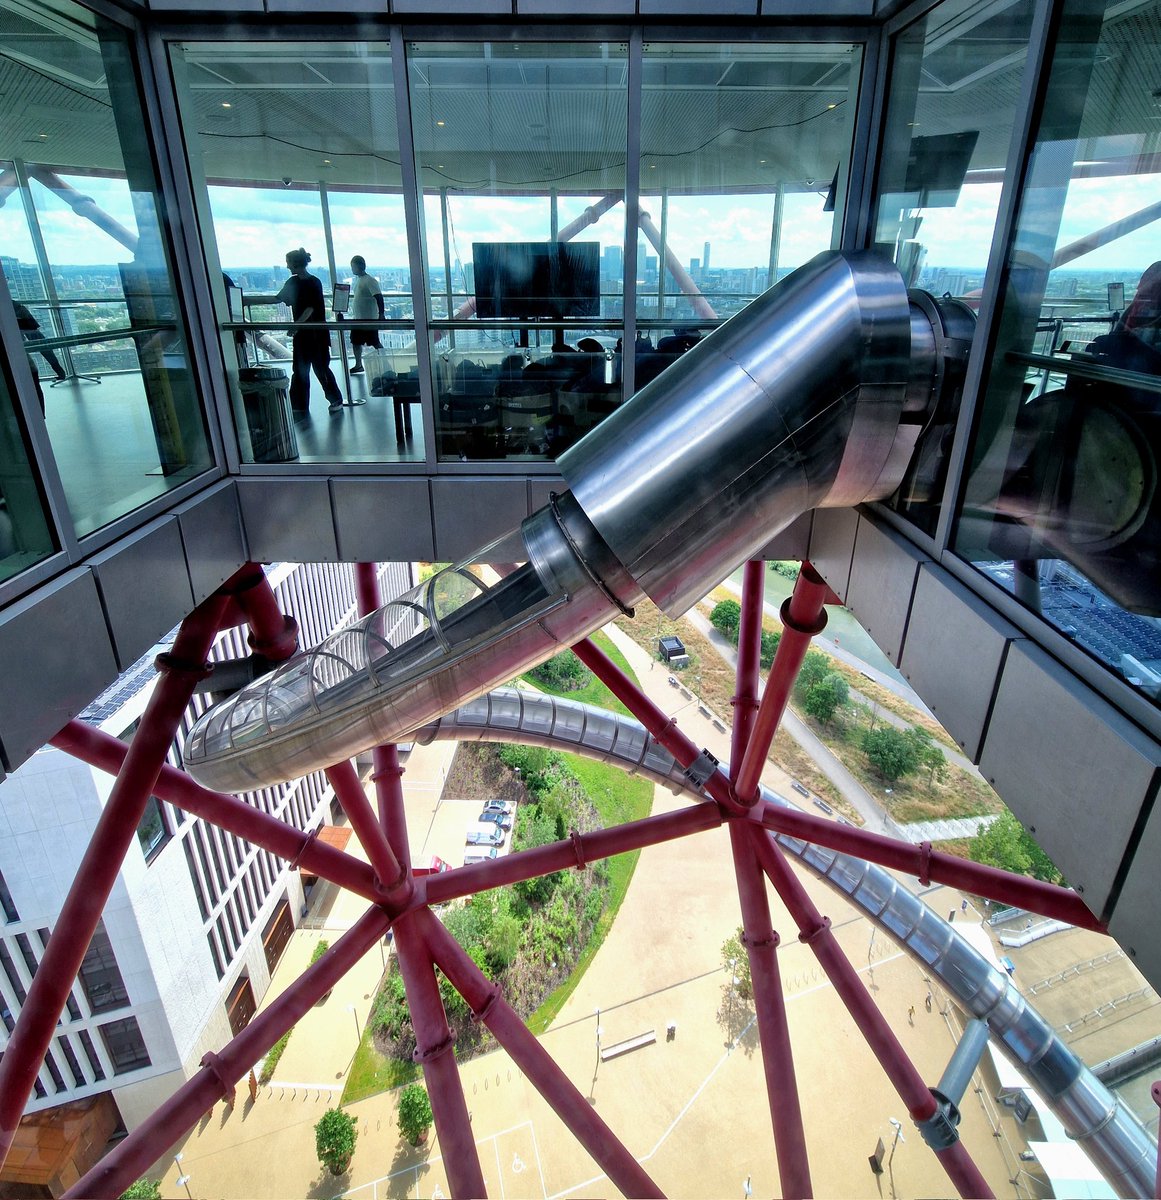 Located in Stratford, London, the ArcelorMittal Orbit is the world's longest and tallest tunnel slide!

At 178 metres long, a 40 second ride takes guests up to speeds of 15 miles per hour as they twist around the UK's tallest sculpture 12 times!

Have you taken a ride?